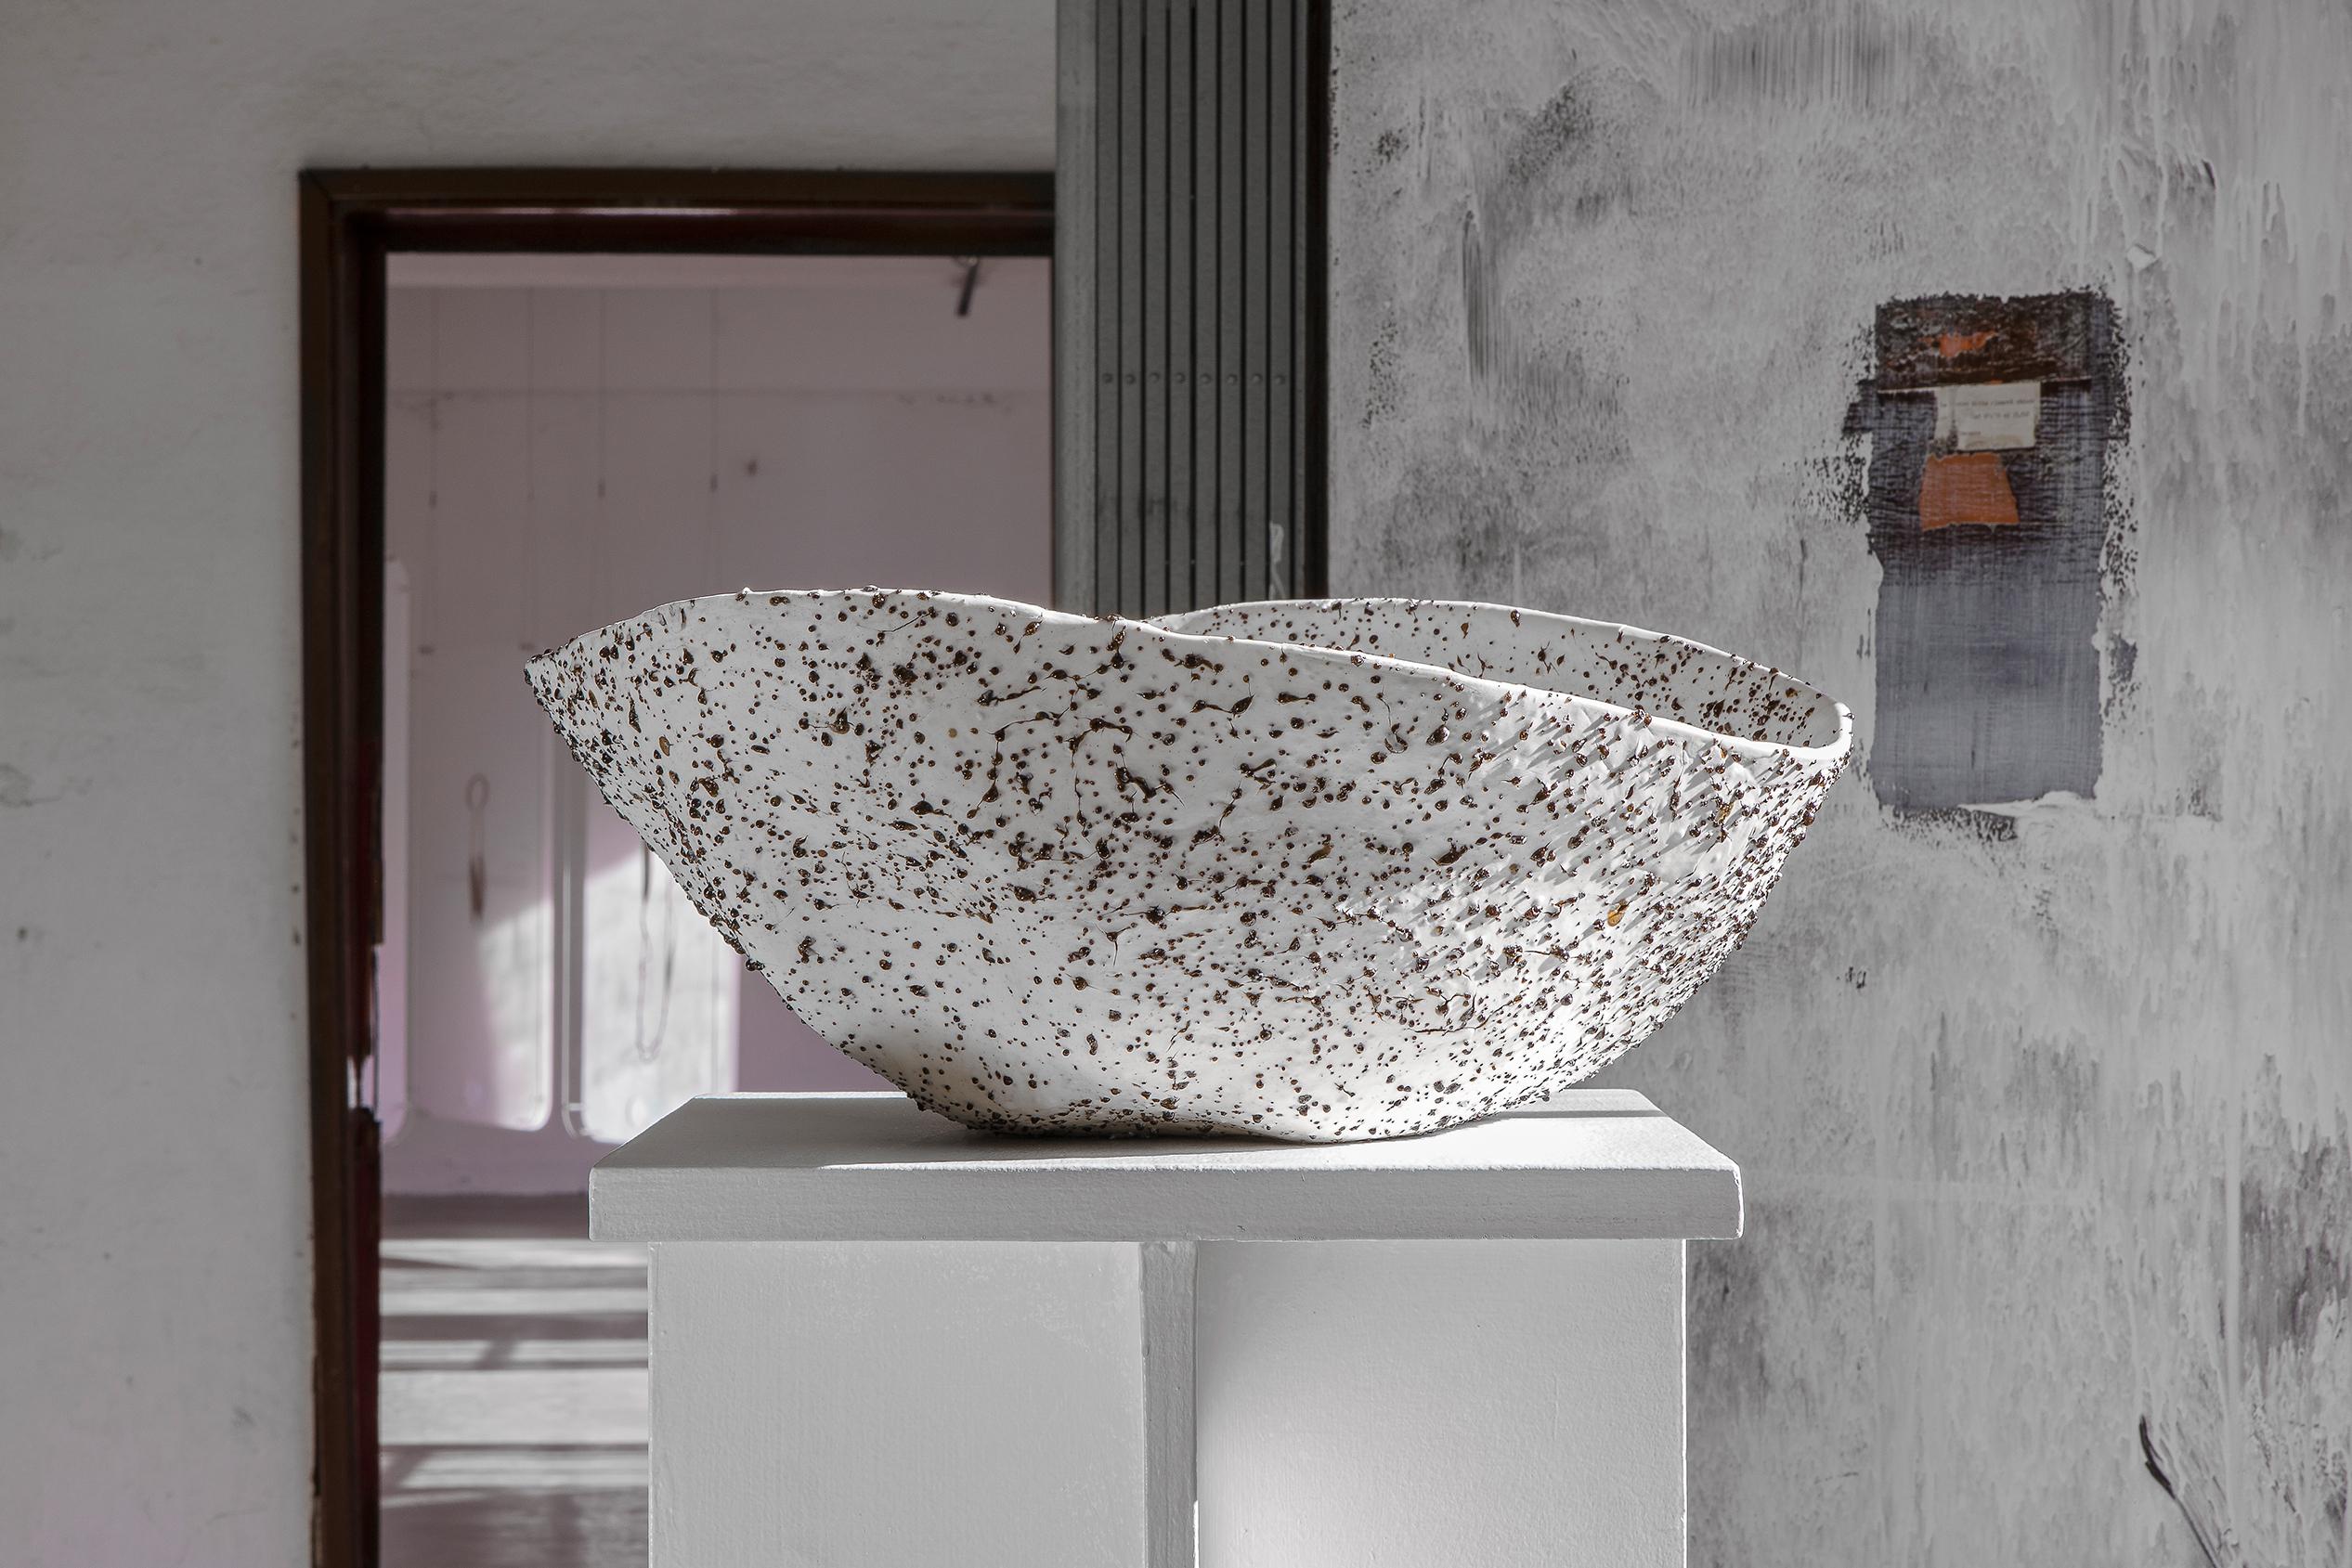 Stracciatella is the first object from the project Telluride, a big bowl create in Volcanic Porcelain. In 2021 the Stracciatella Big Bowls has been awarded the Officine Saffi Award. 
The Volcanic Porcelain is special porcelain realised by Tellurico,